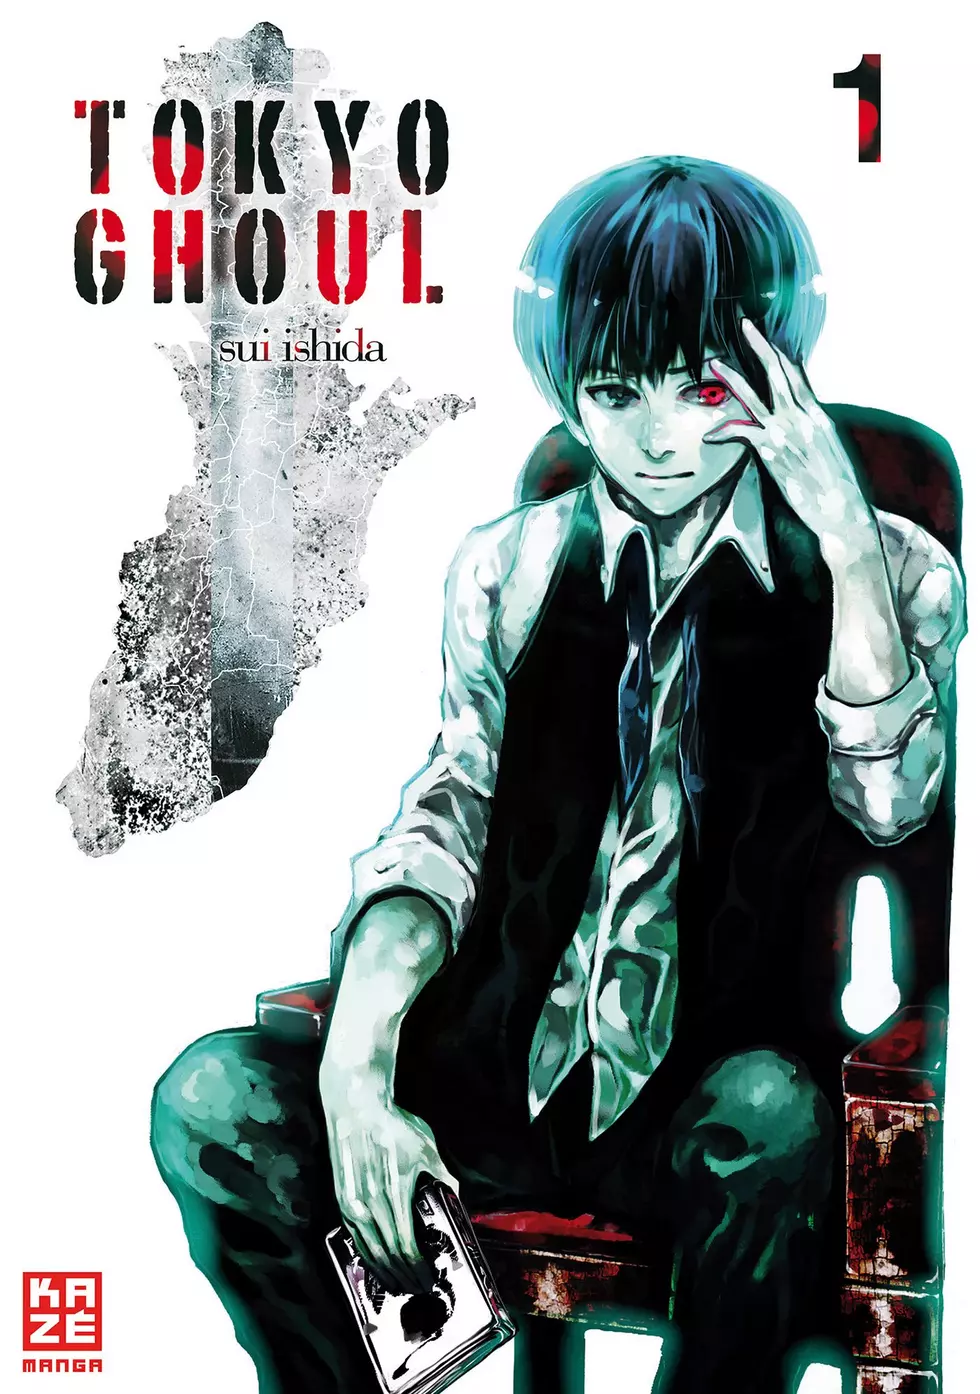 Coffee And Monsters: Should You Be Reading &#8216;Tokyo Ghoul&#8217;?